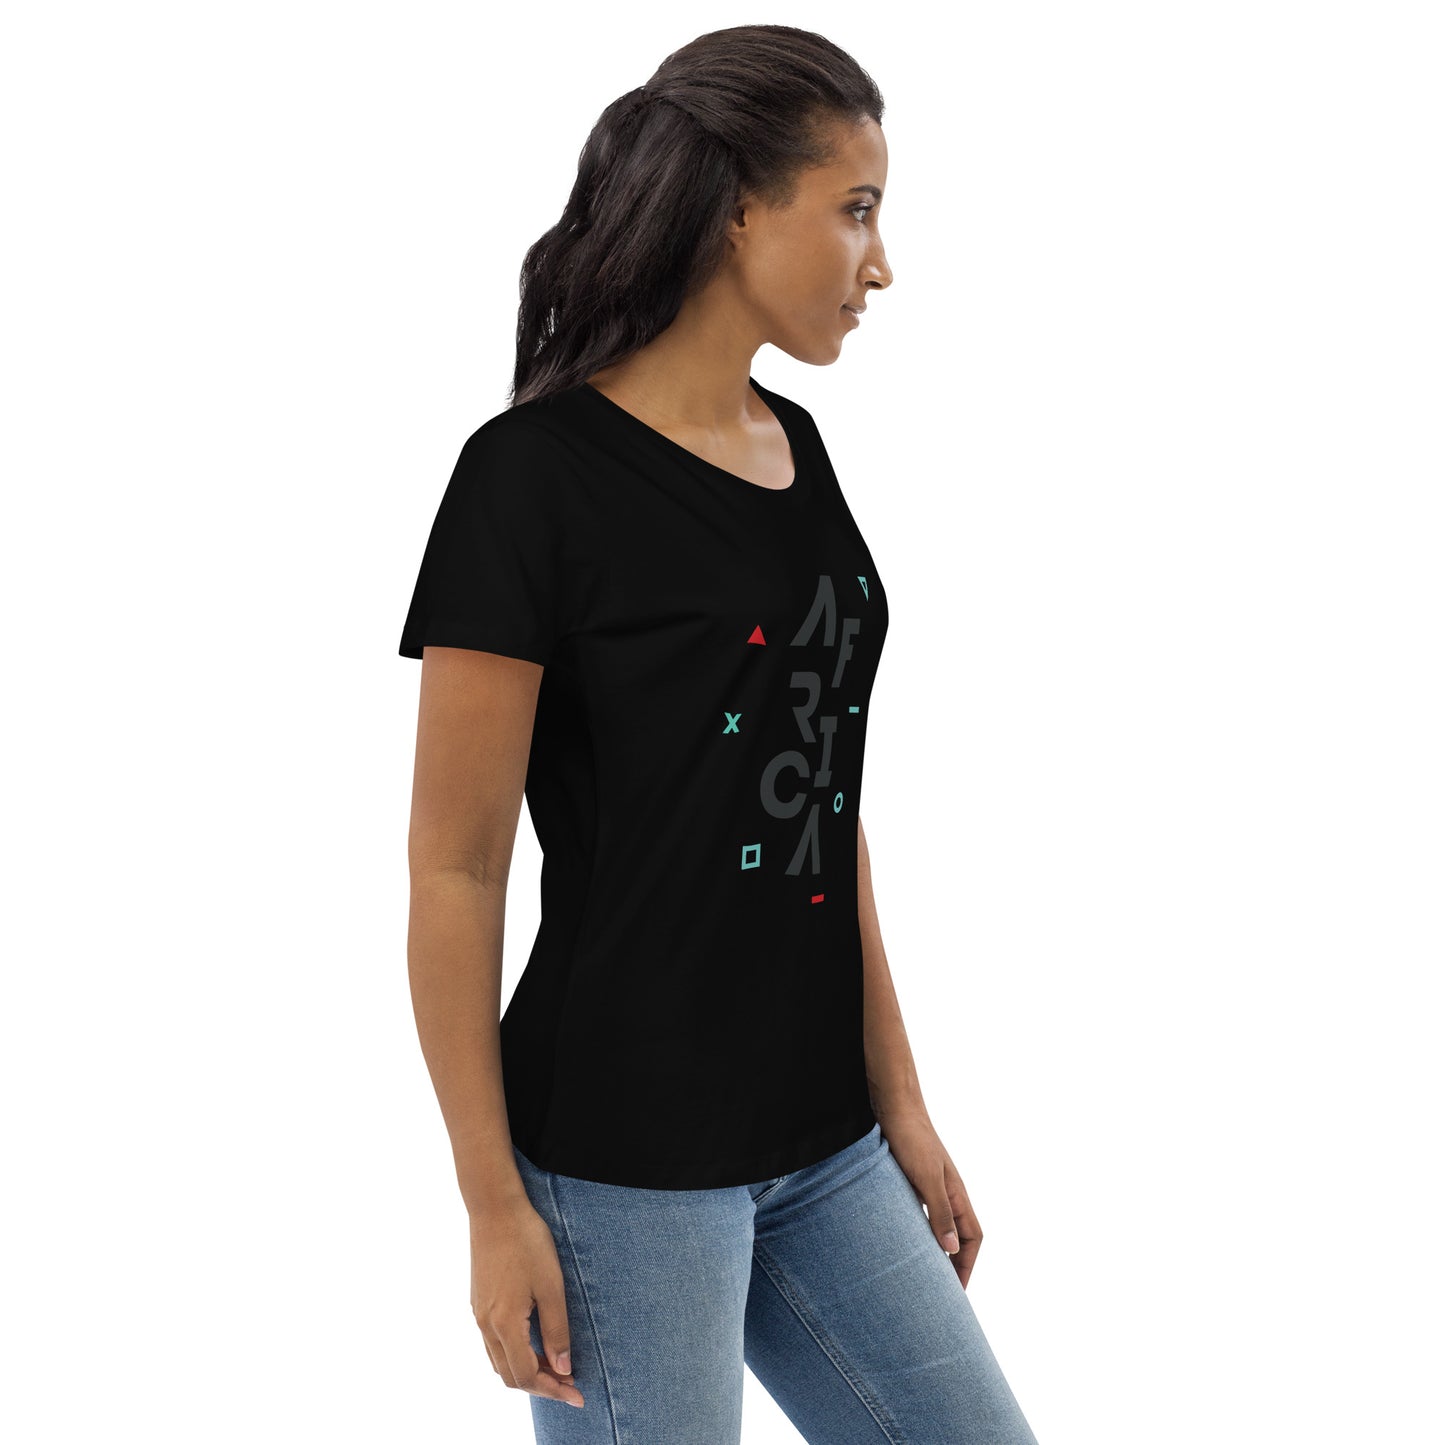 AFRICA IS THE FUTURE Women's Tee